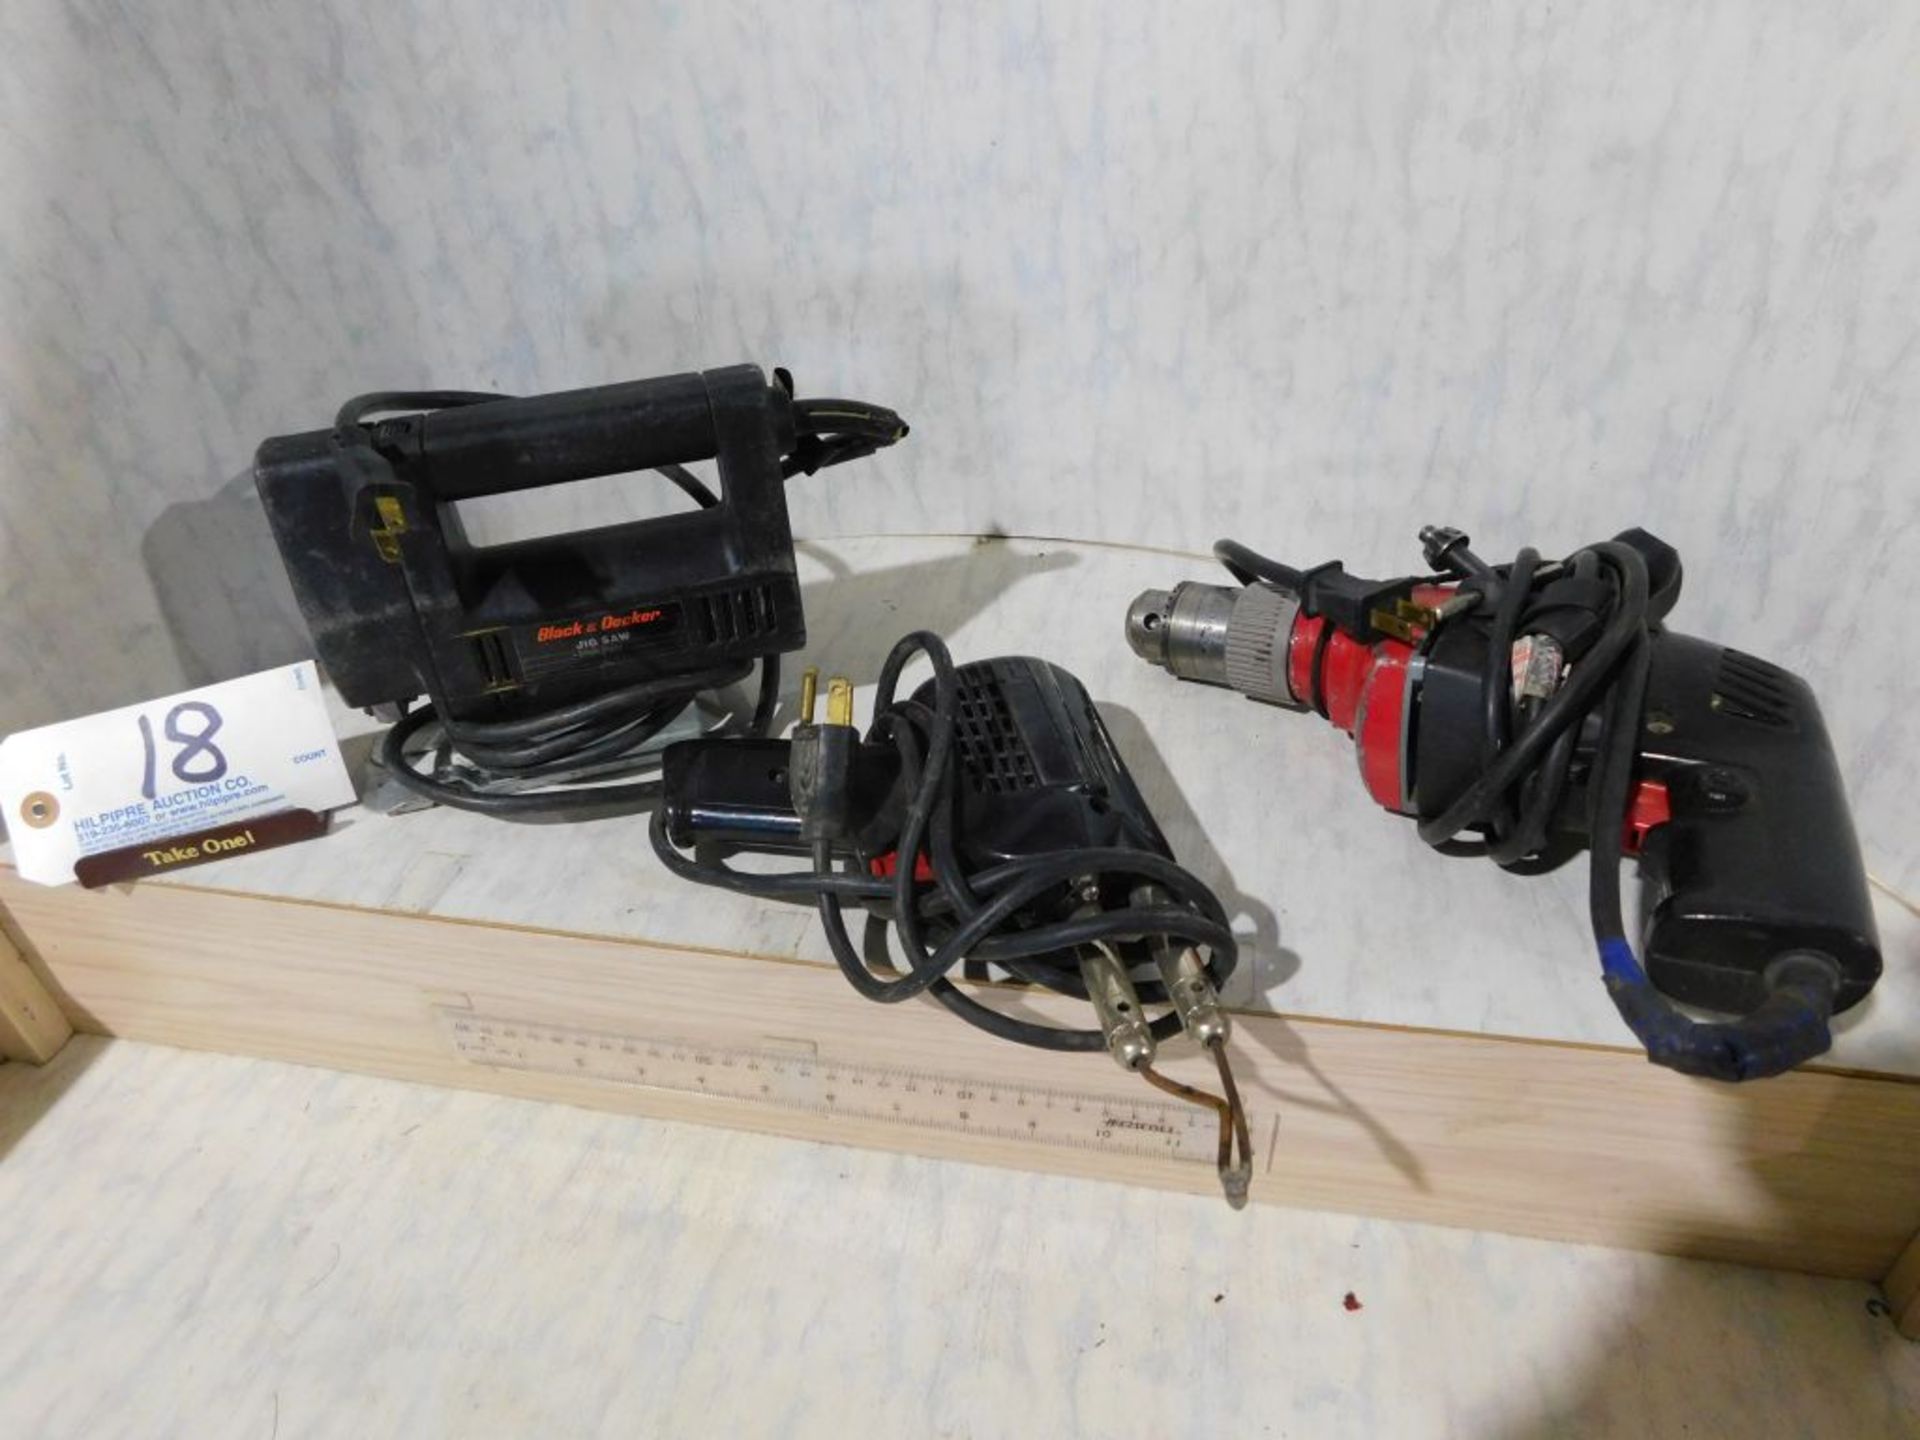 Skil heavy duty solder gun and sabre saw, elec. (Located at and to be picked up at: 2862 Wagner Rd.,